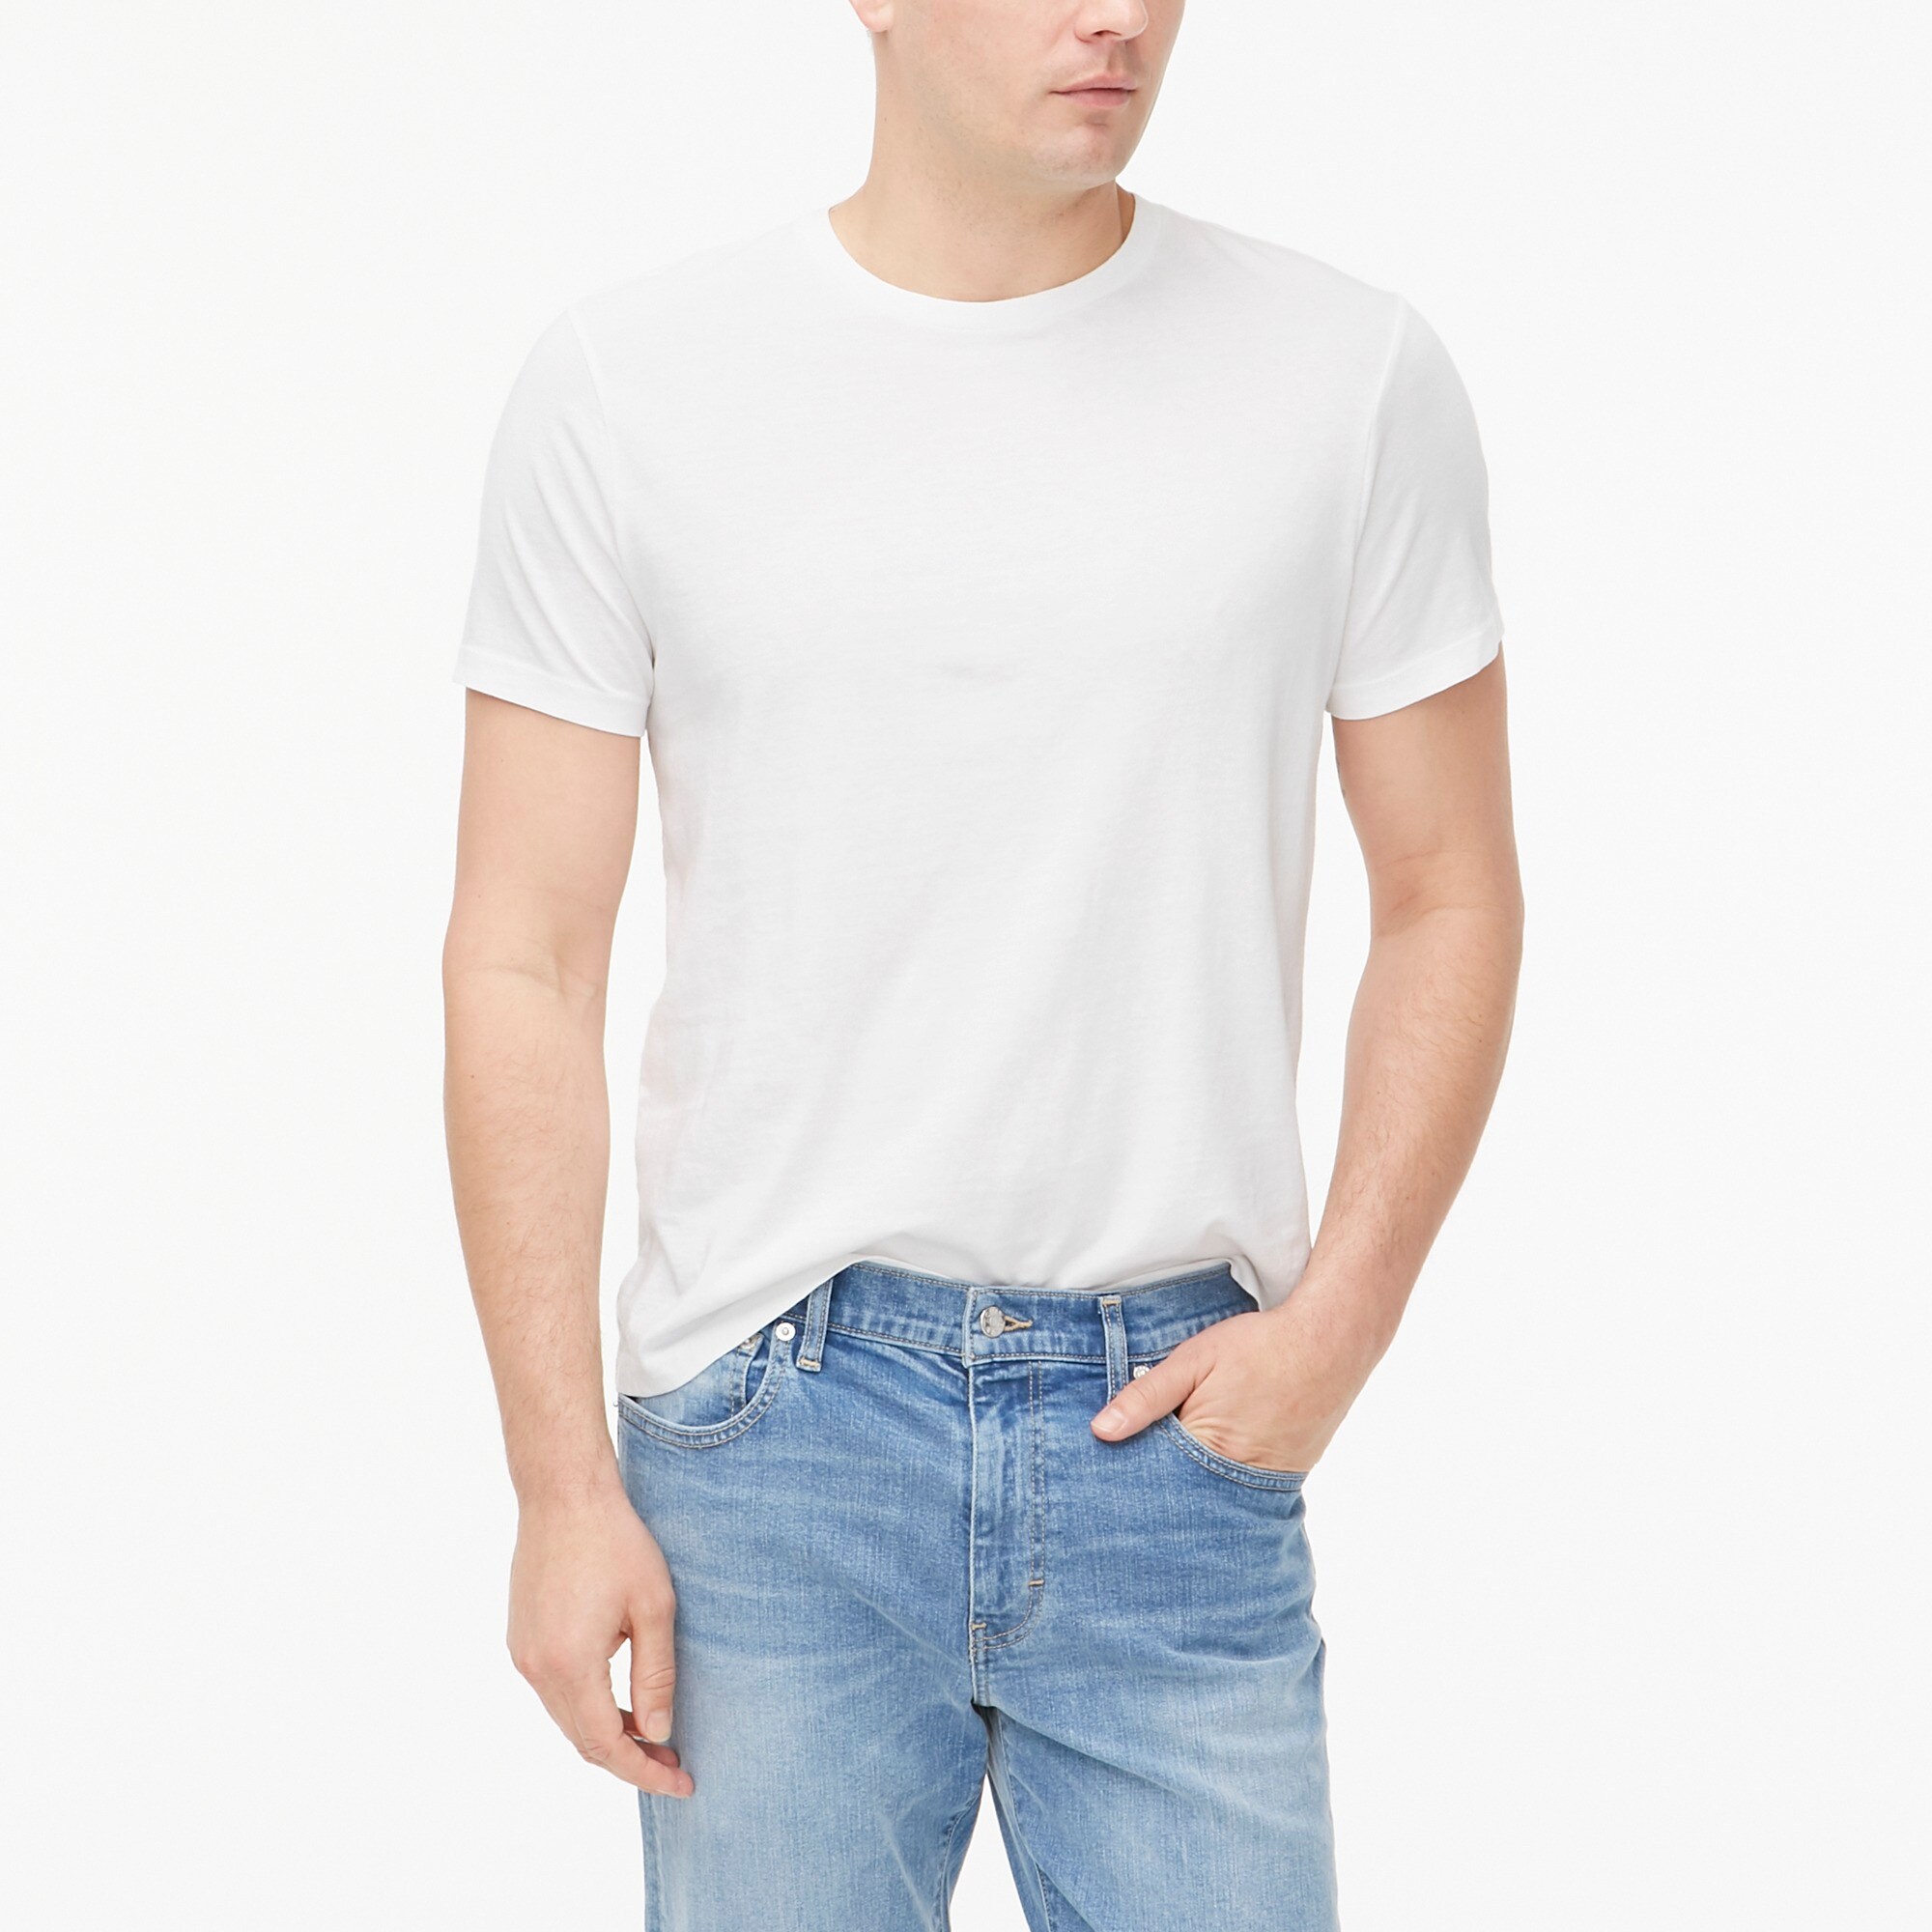  Tall washed jersey tee